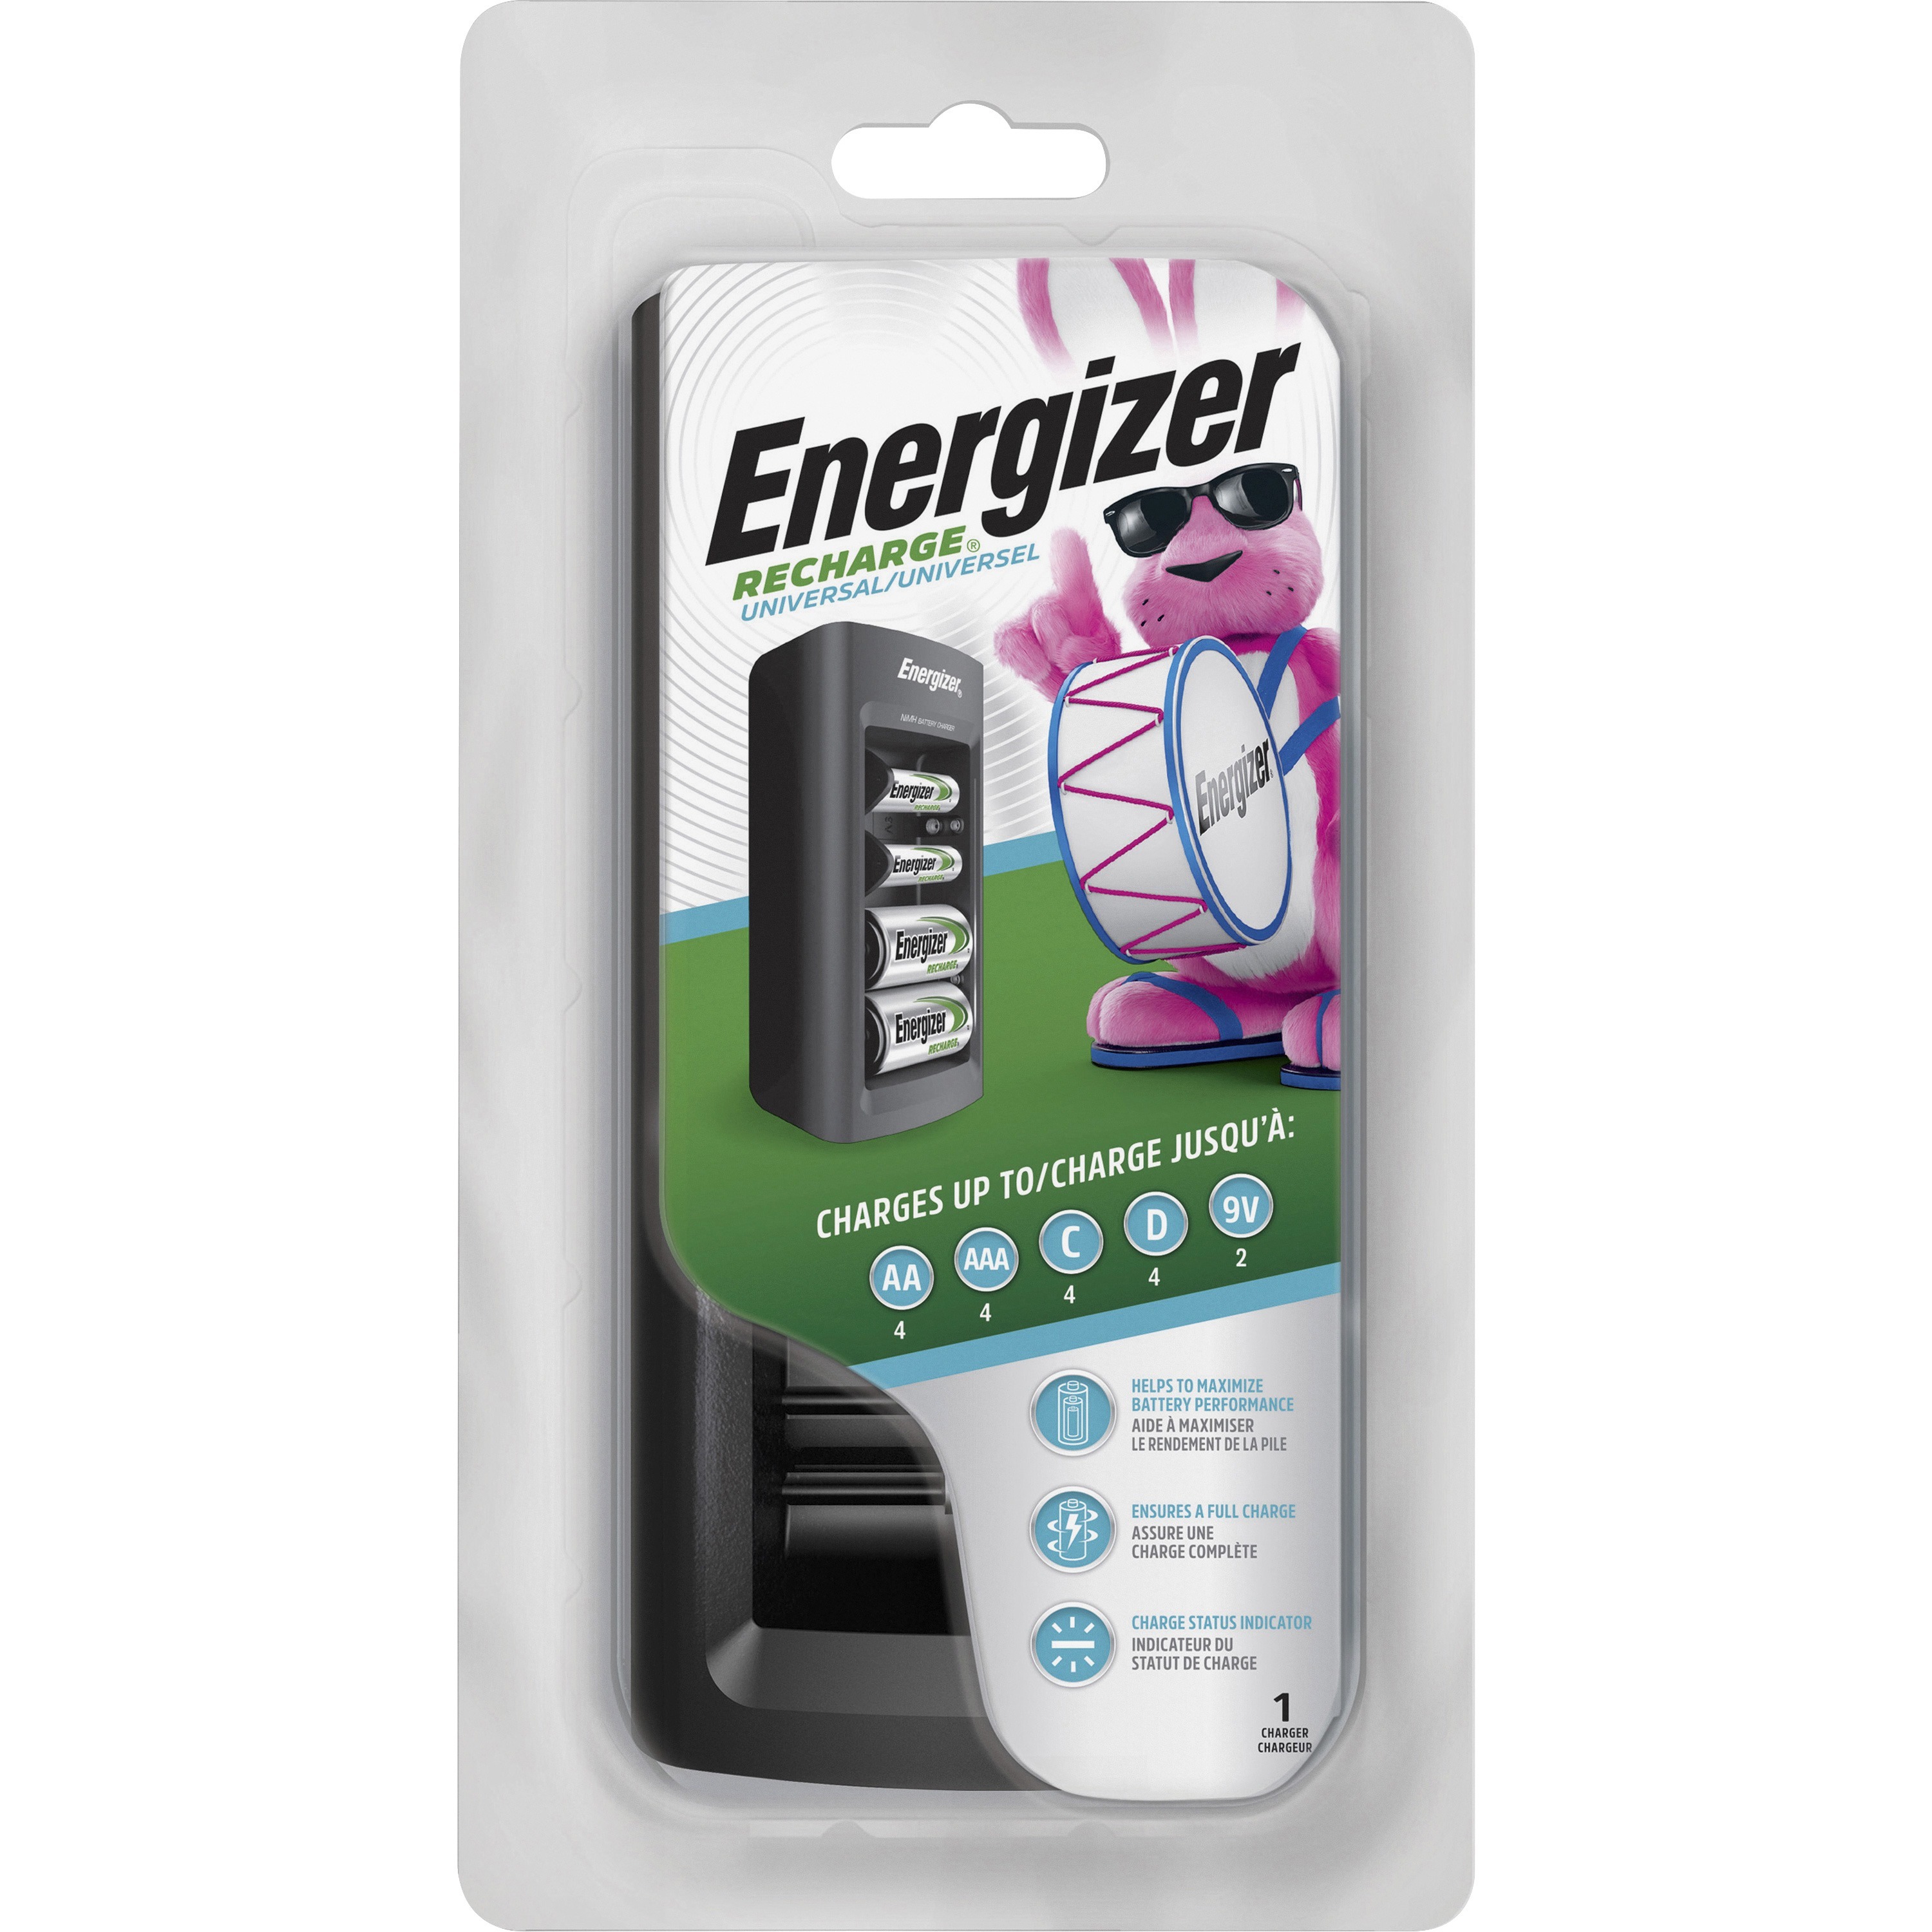 Energizer Chargeur Maxi pour AA/AAA batterie + 4 piles AA, 2000mAh